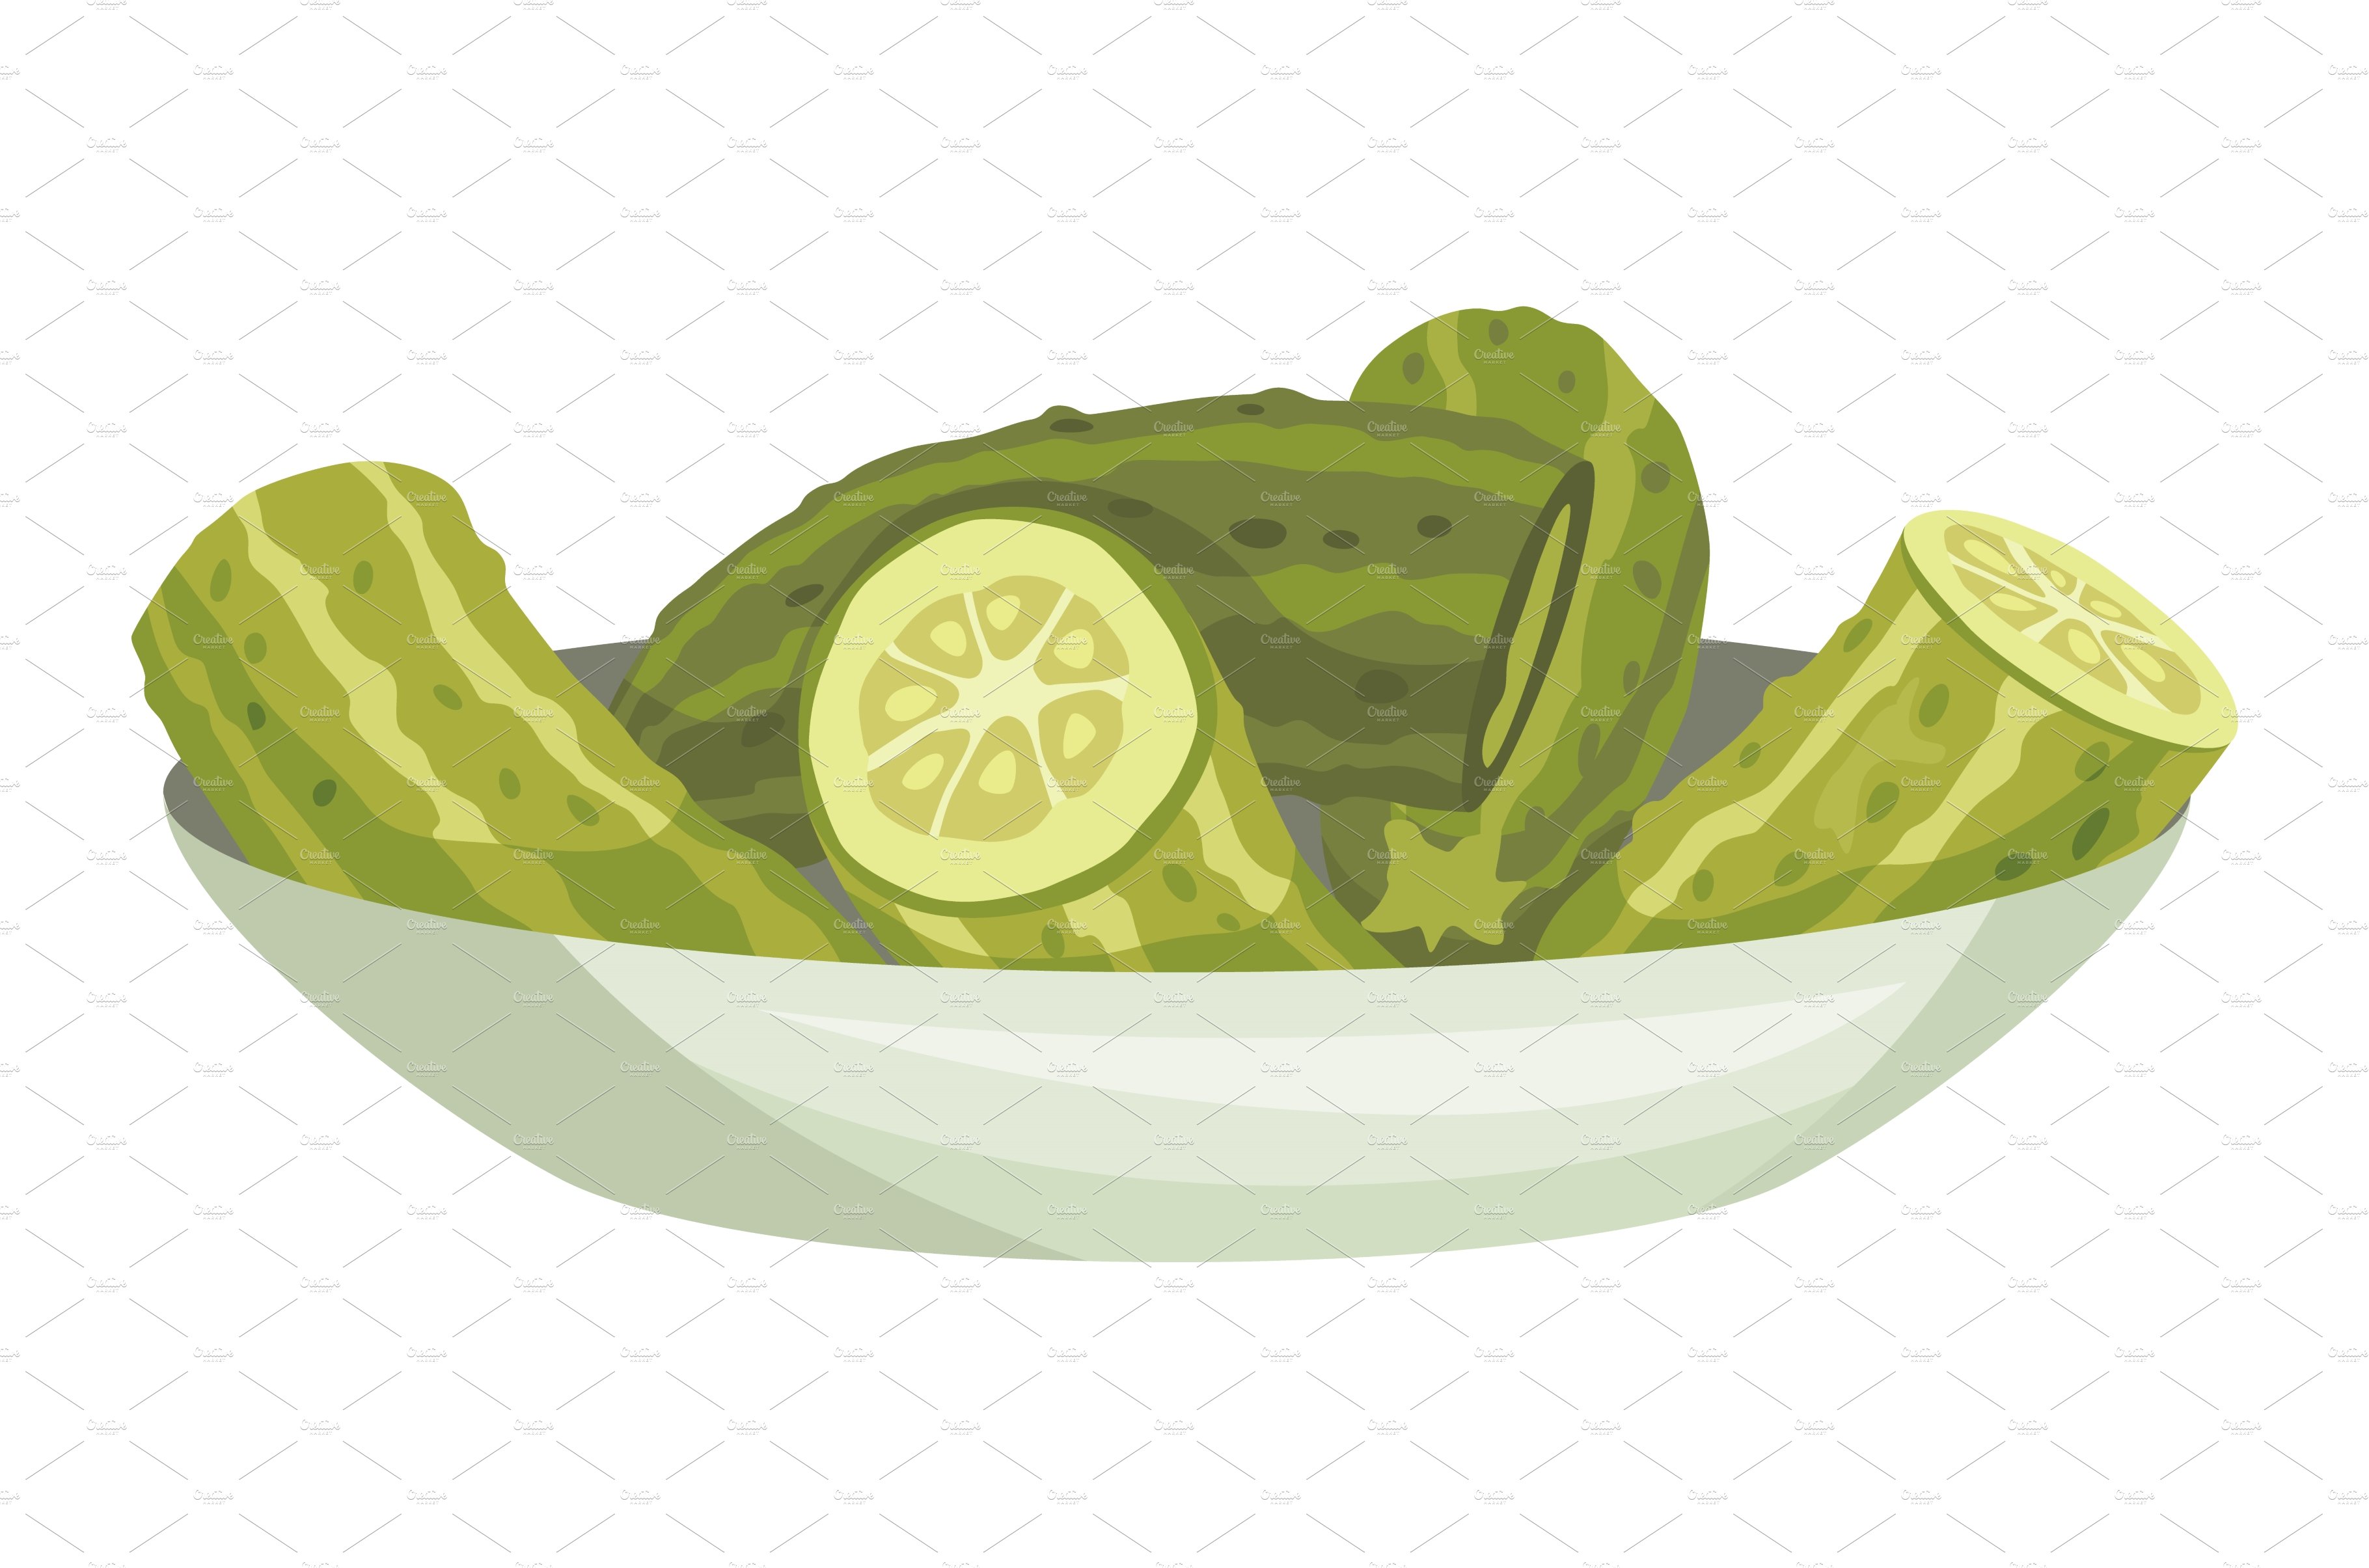 Homemade pickled cucumber cover image.